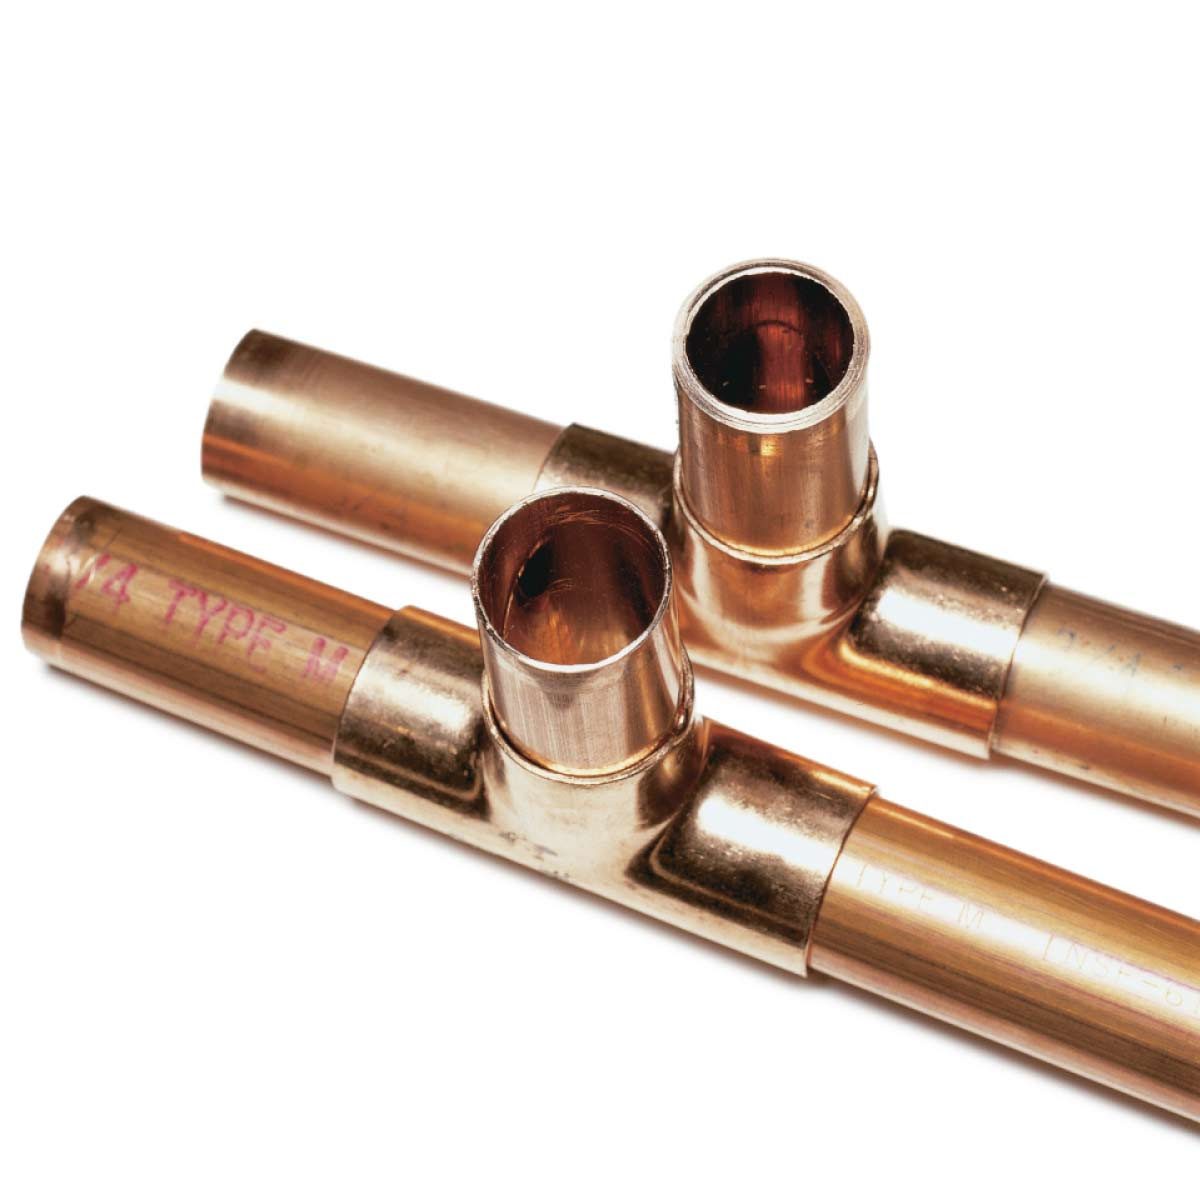 Copper Pipe Types: What's the difference?